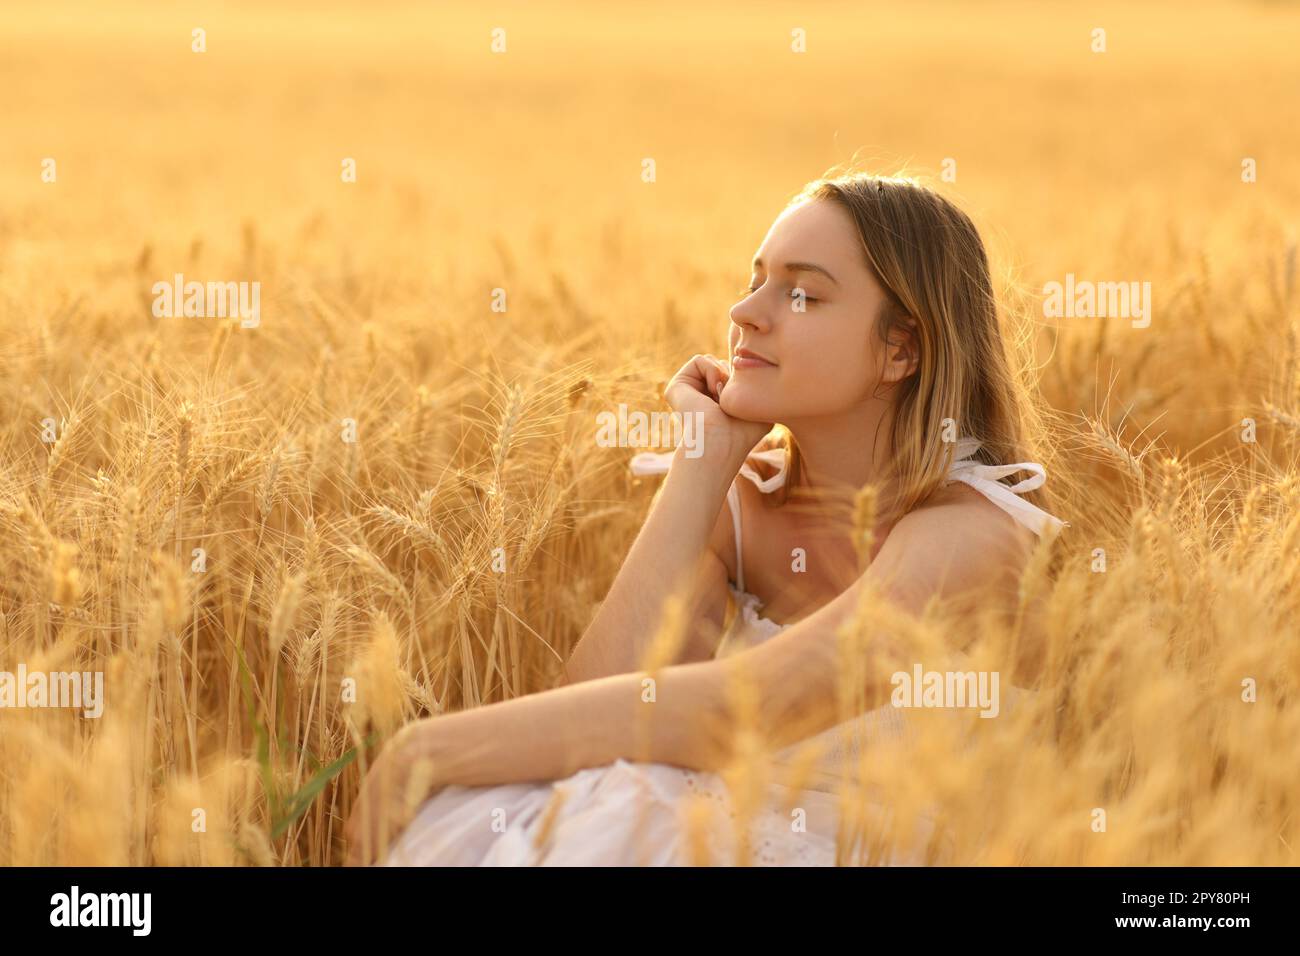 Woman relaxing alone in a field Stock Photo